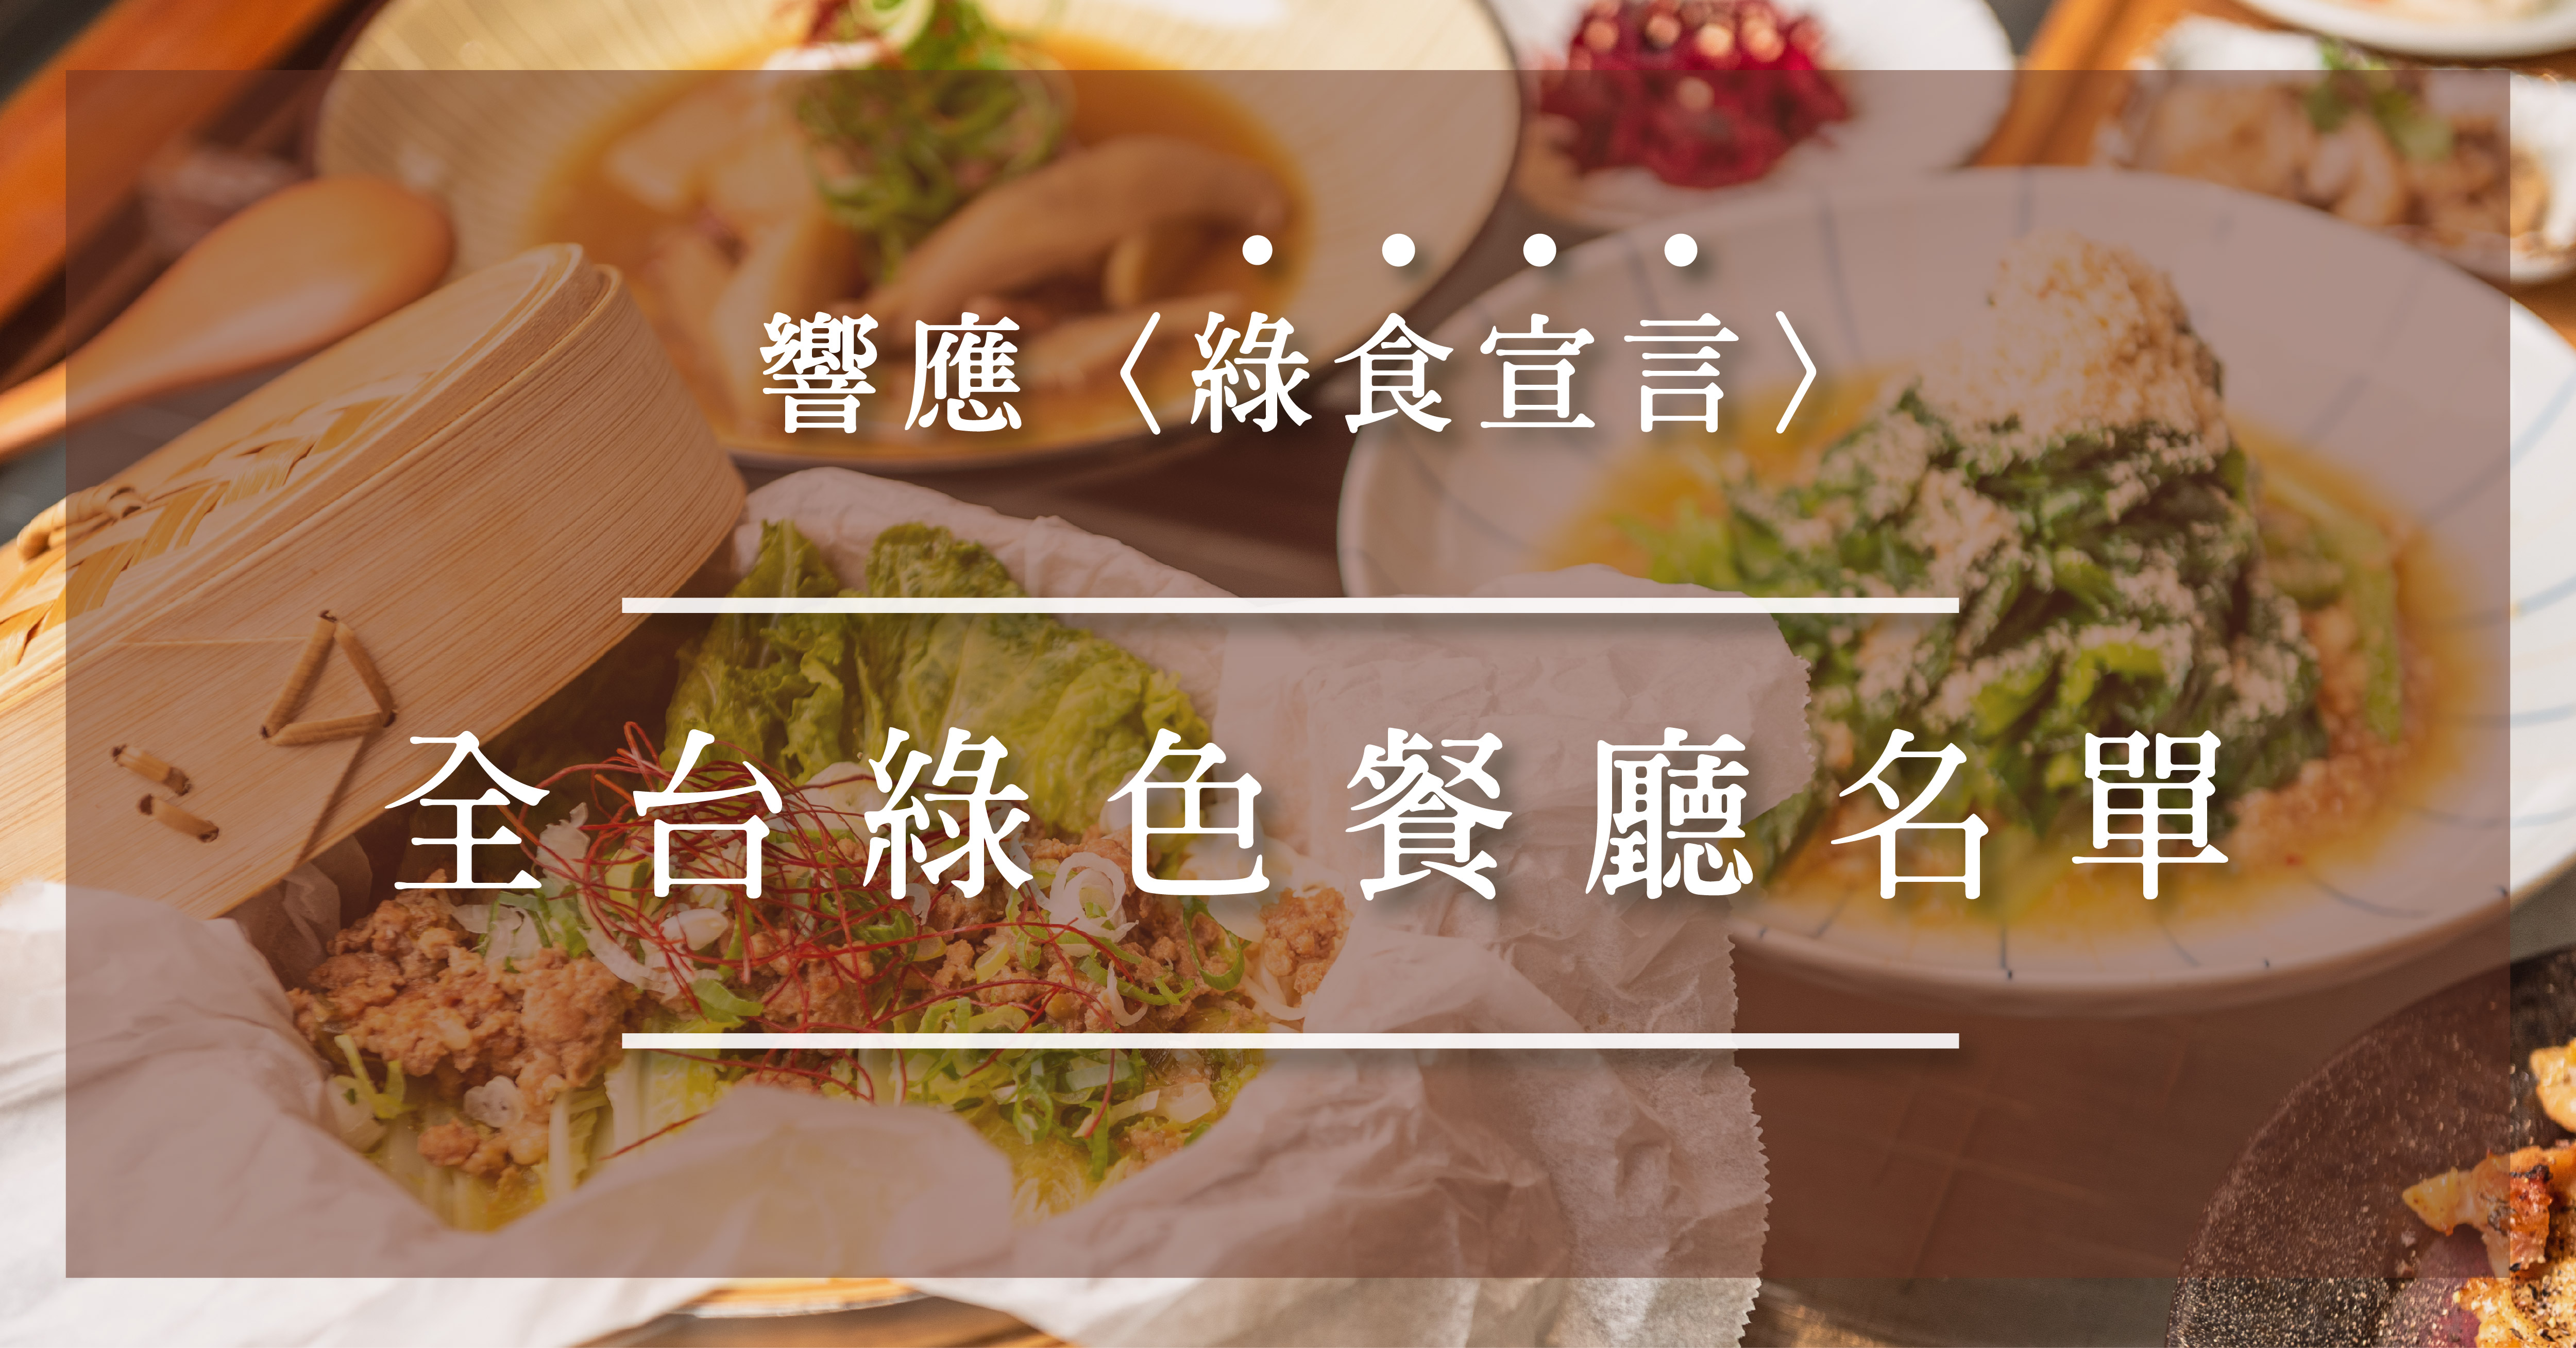 List of green restaurants across Taiwan in response to the Green Declaration